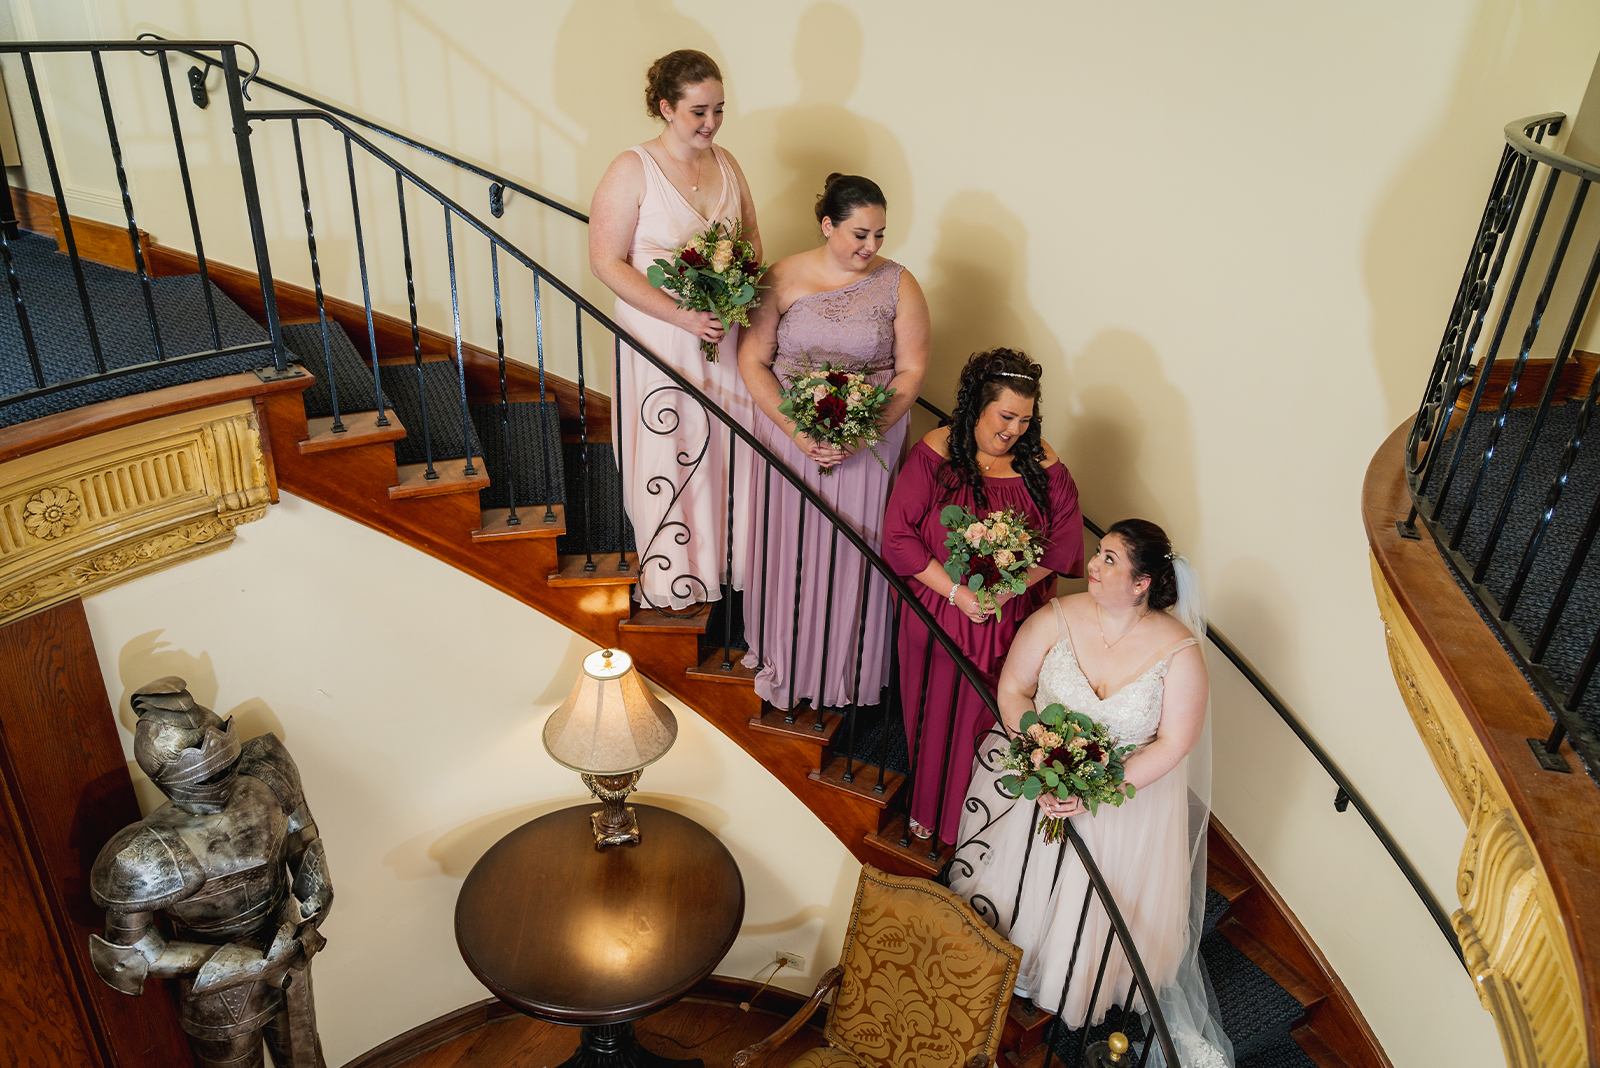 Bride and bridesmaids on staircase, bridal party portrait, cute bridal party portrait, formal, outdoor September wedding ceremony at Punderson Manor Lodge & Conference Center